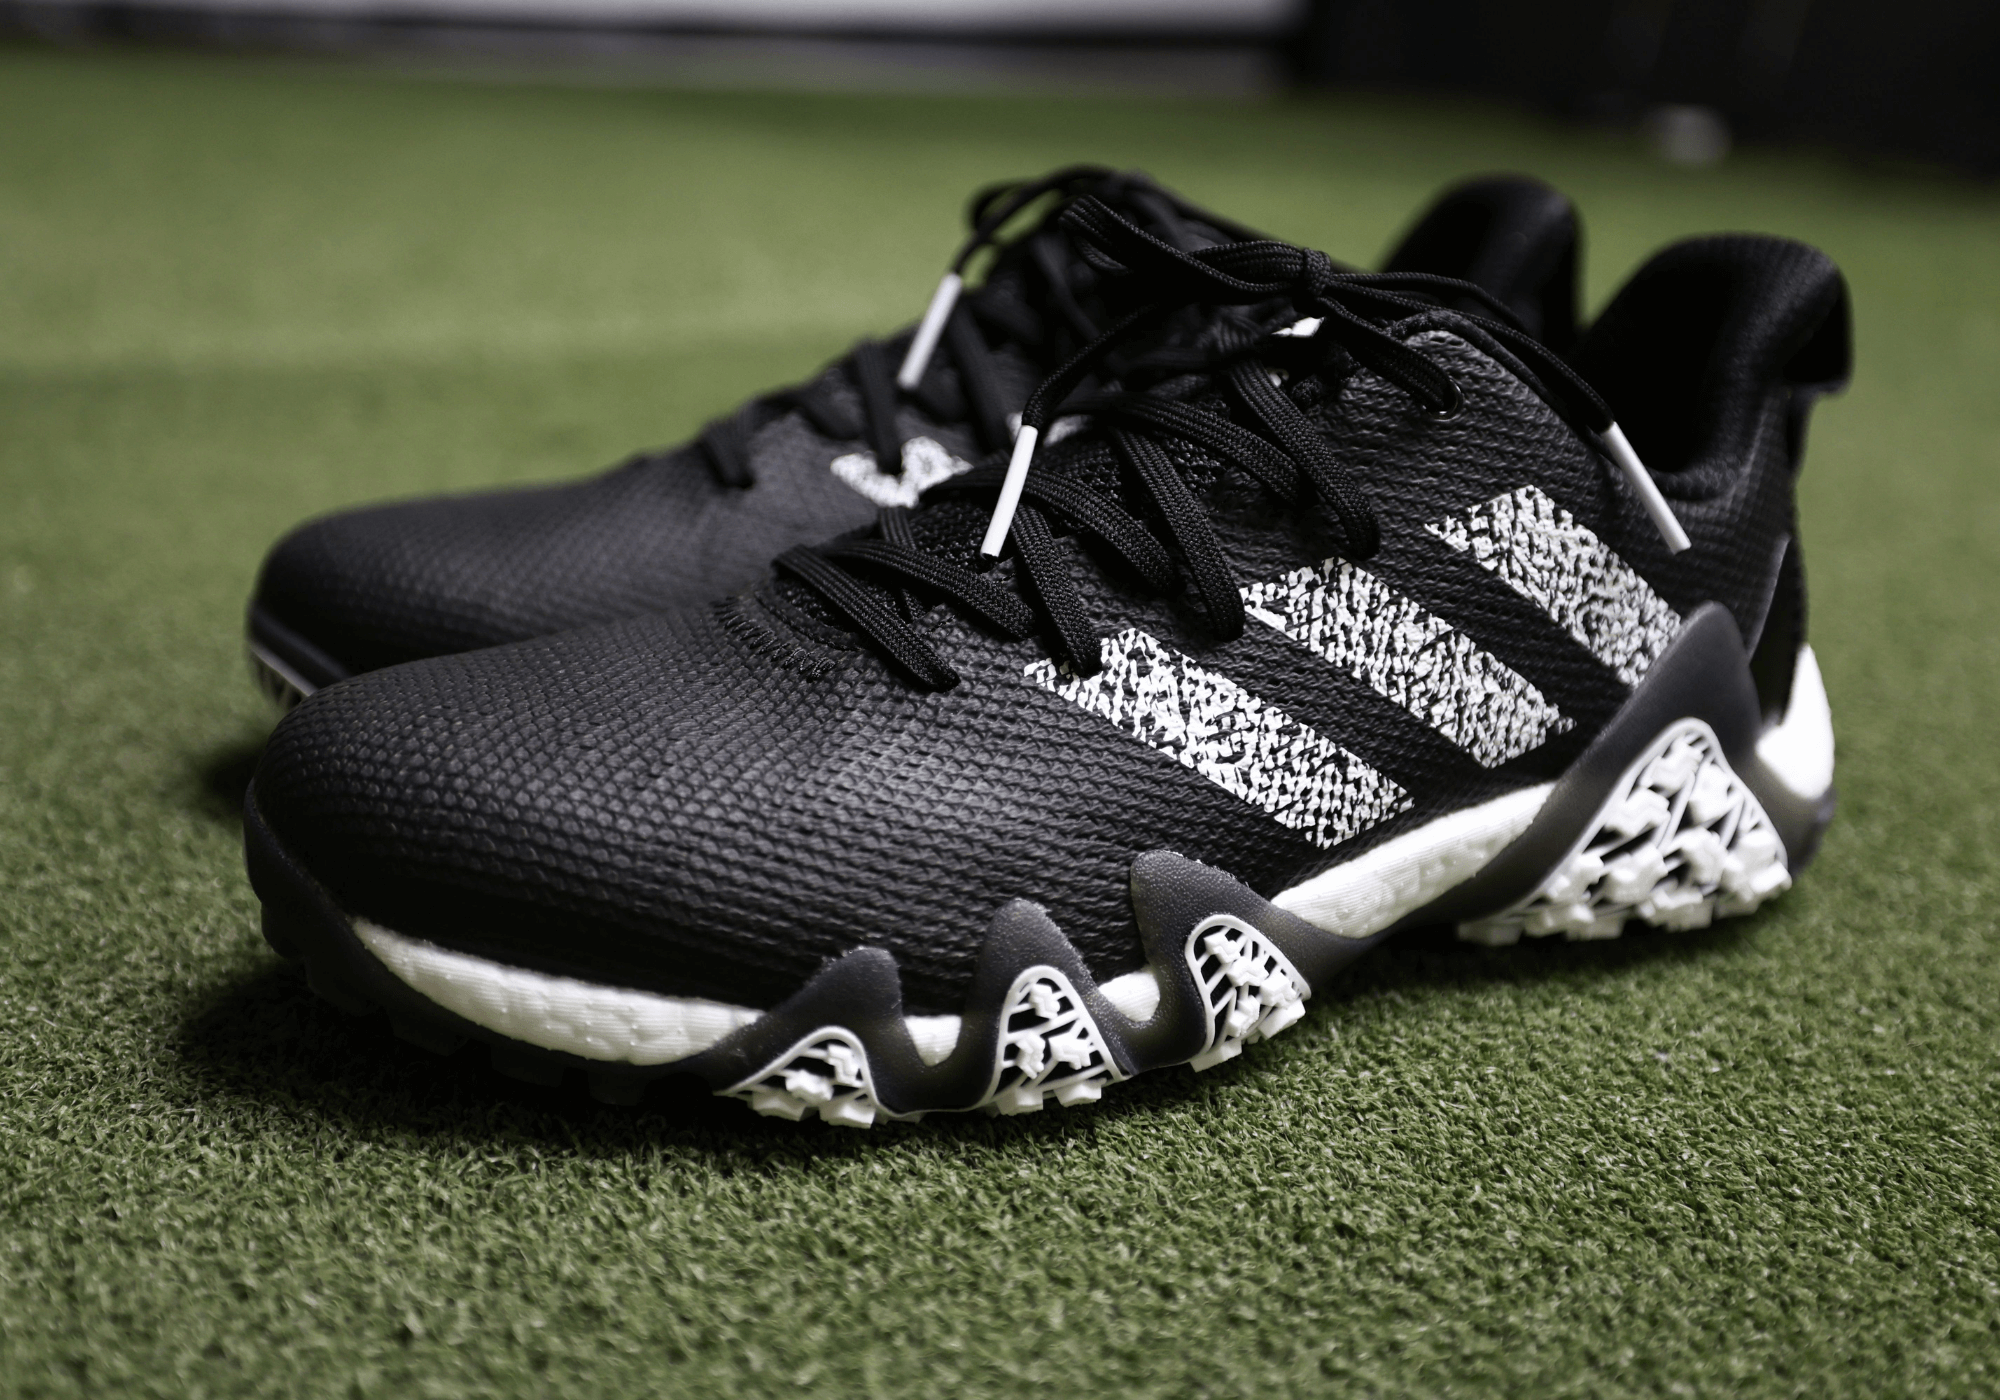 THe CodeChaos 22 is one of the best waterproof golf shoes